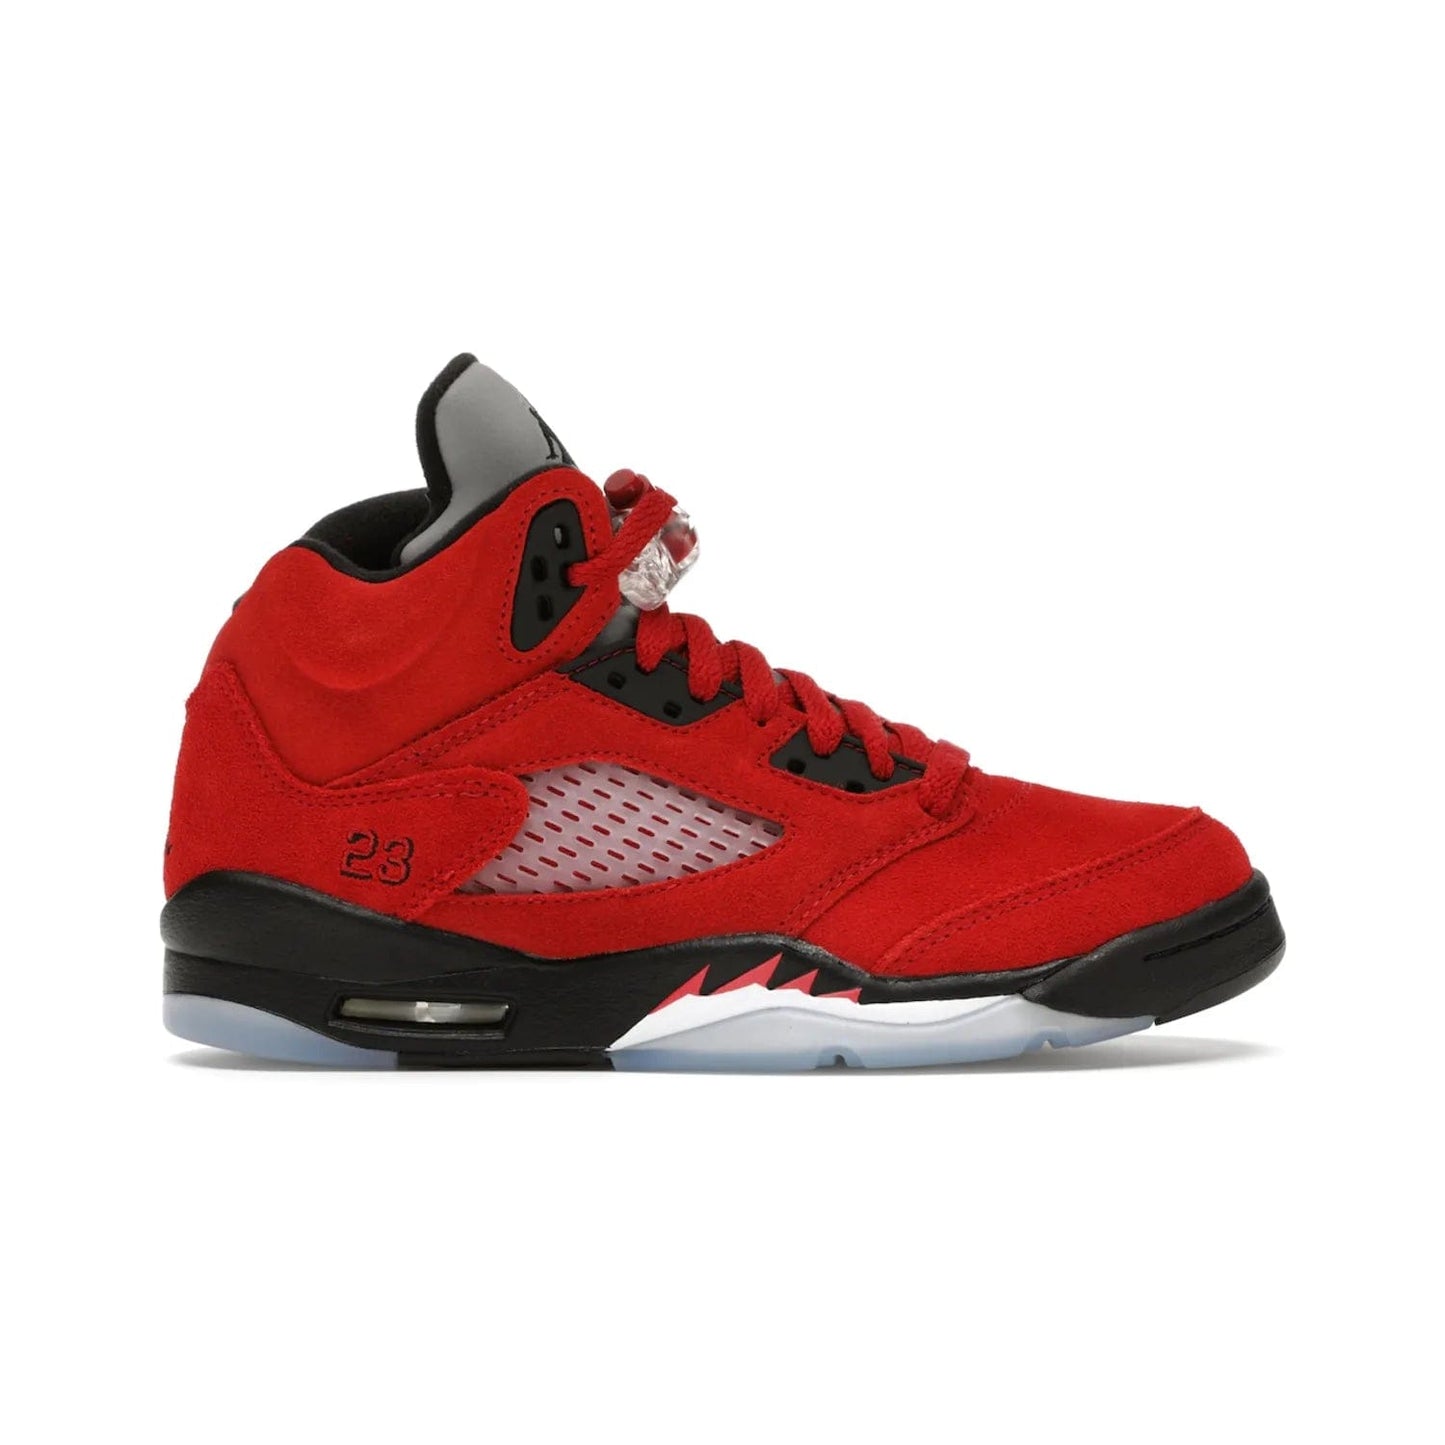 Jordan 5 Retro Raging Bull Red (2021) (GS) - Image 1 - Only at www.BallersClubKickz.com - Jordan 5 Retro Raging Bulls Red 2021 GS. Varsity Red suede upper with embroidered number 23, black leather detail, red laces, and midsole with air cushioning. Jumpman logos on tongue, heel, and outsole. On-trend streetwear and basketball style. Released April 10, 2021.